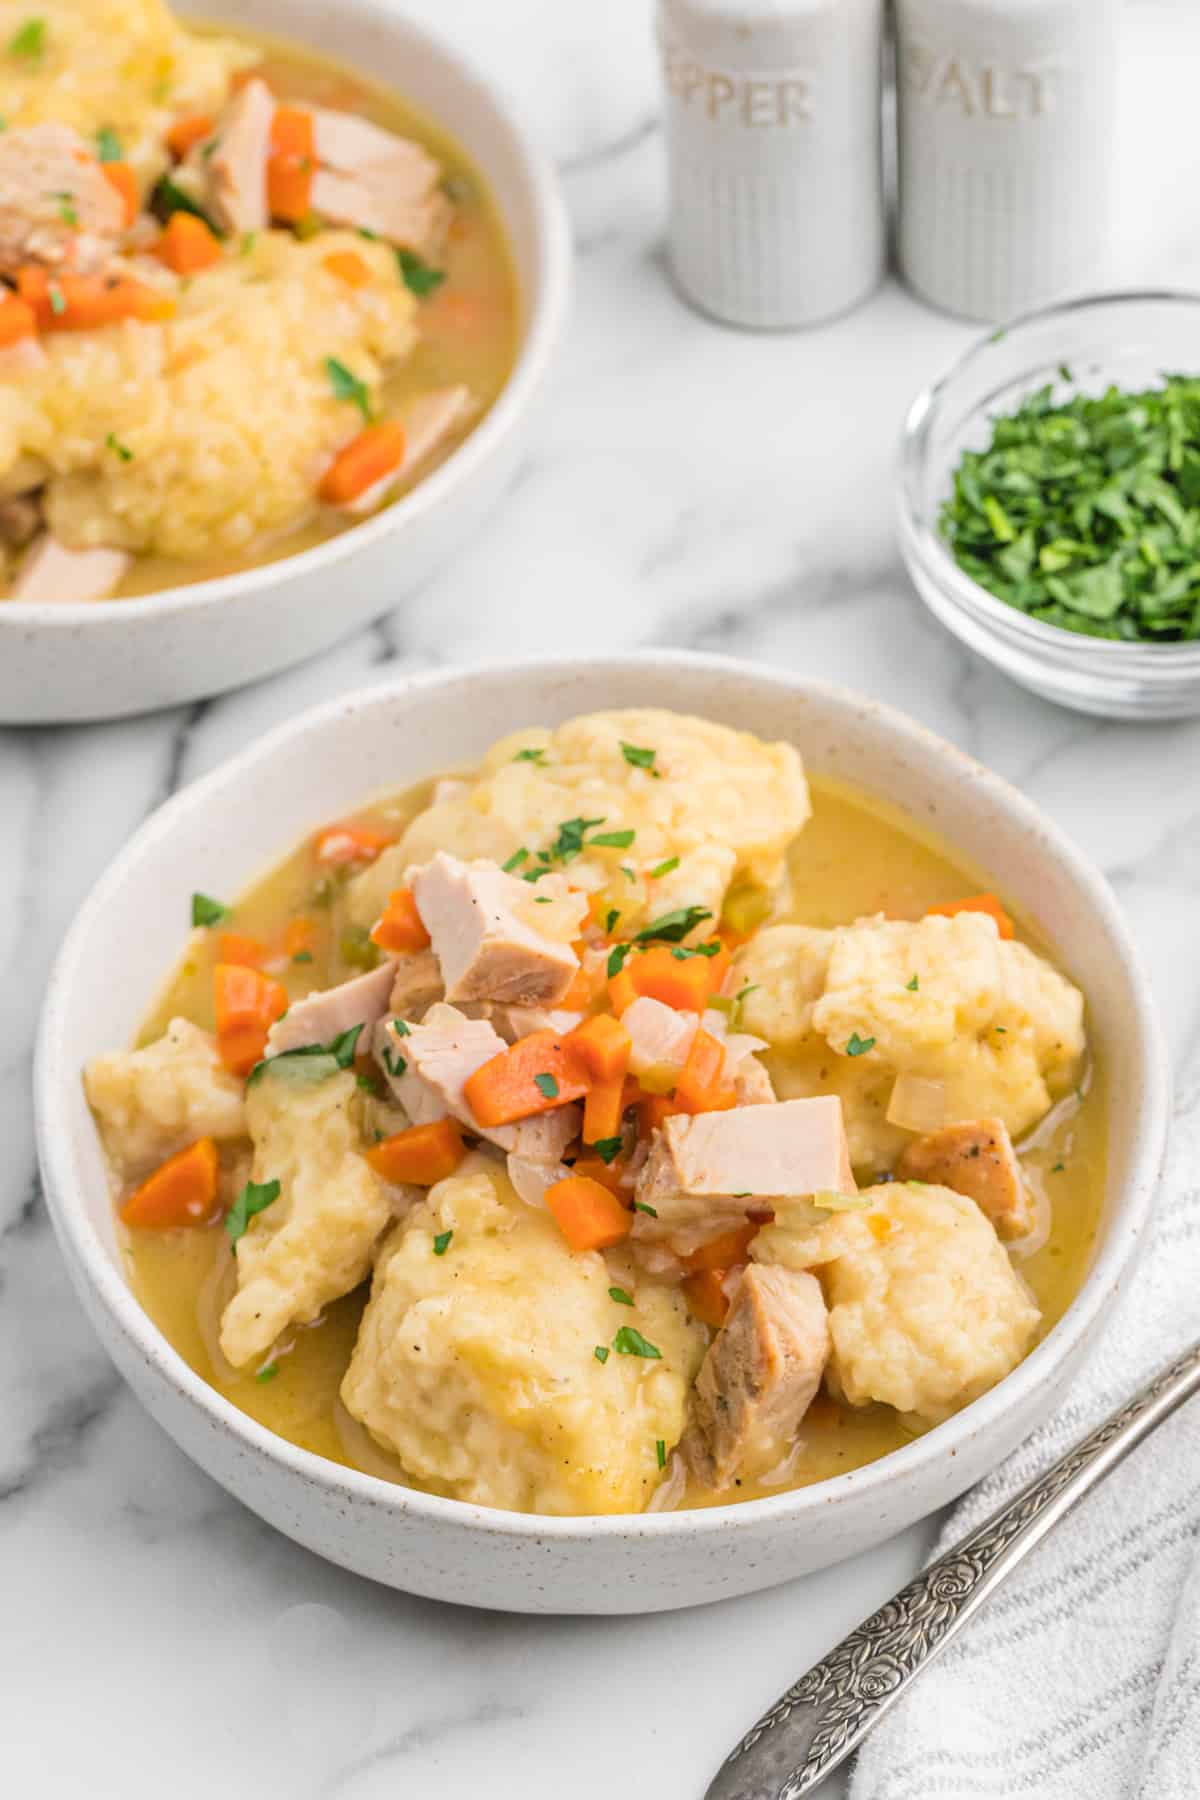 Two large bowls of turkey and dumplings ready to serve